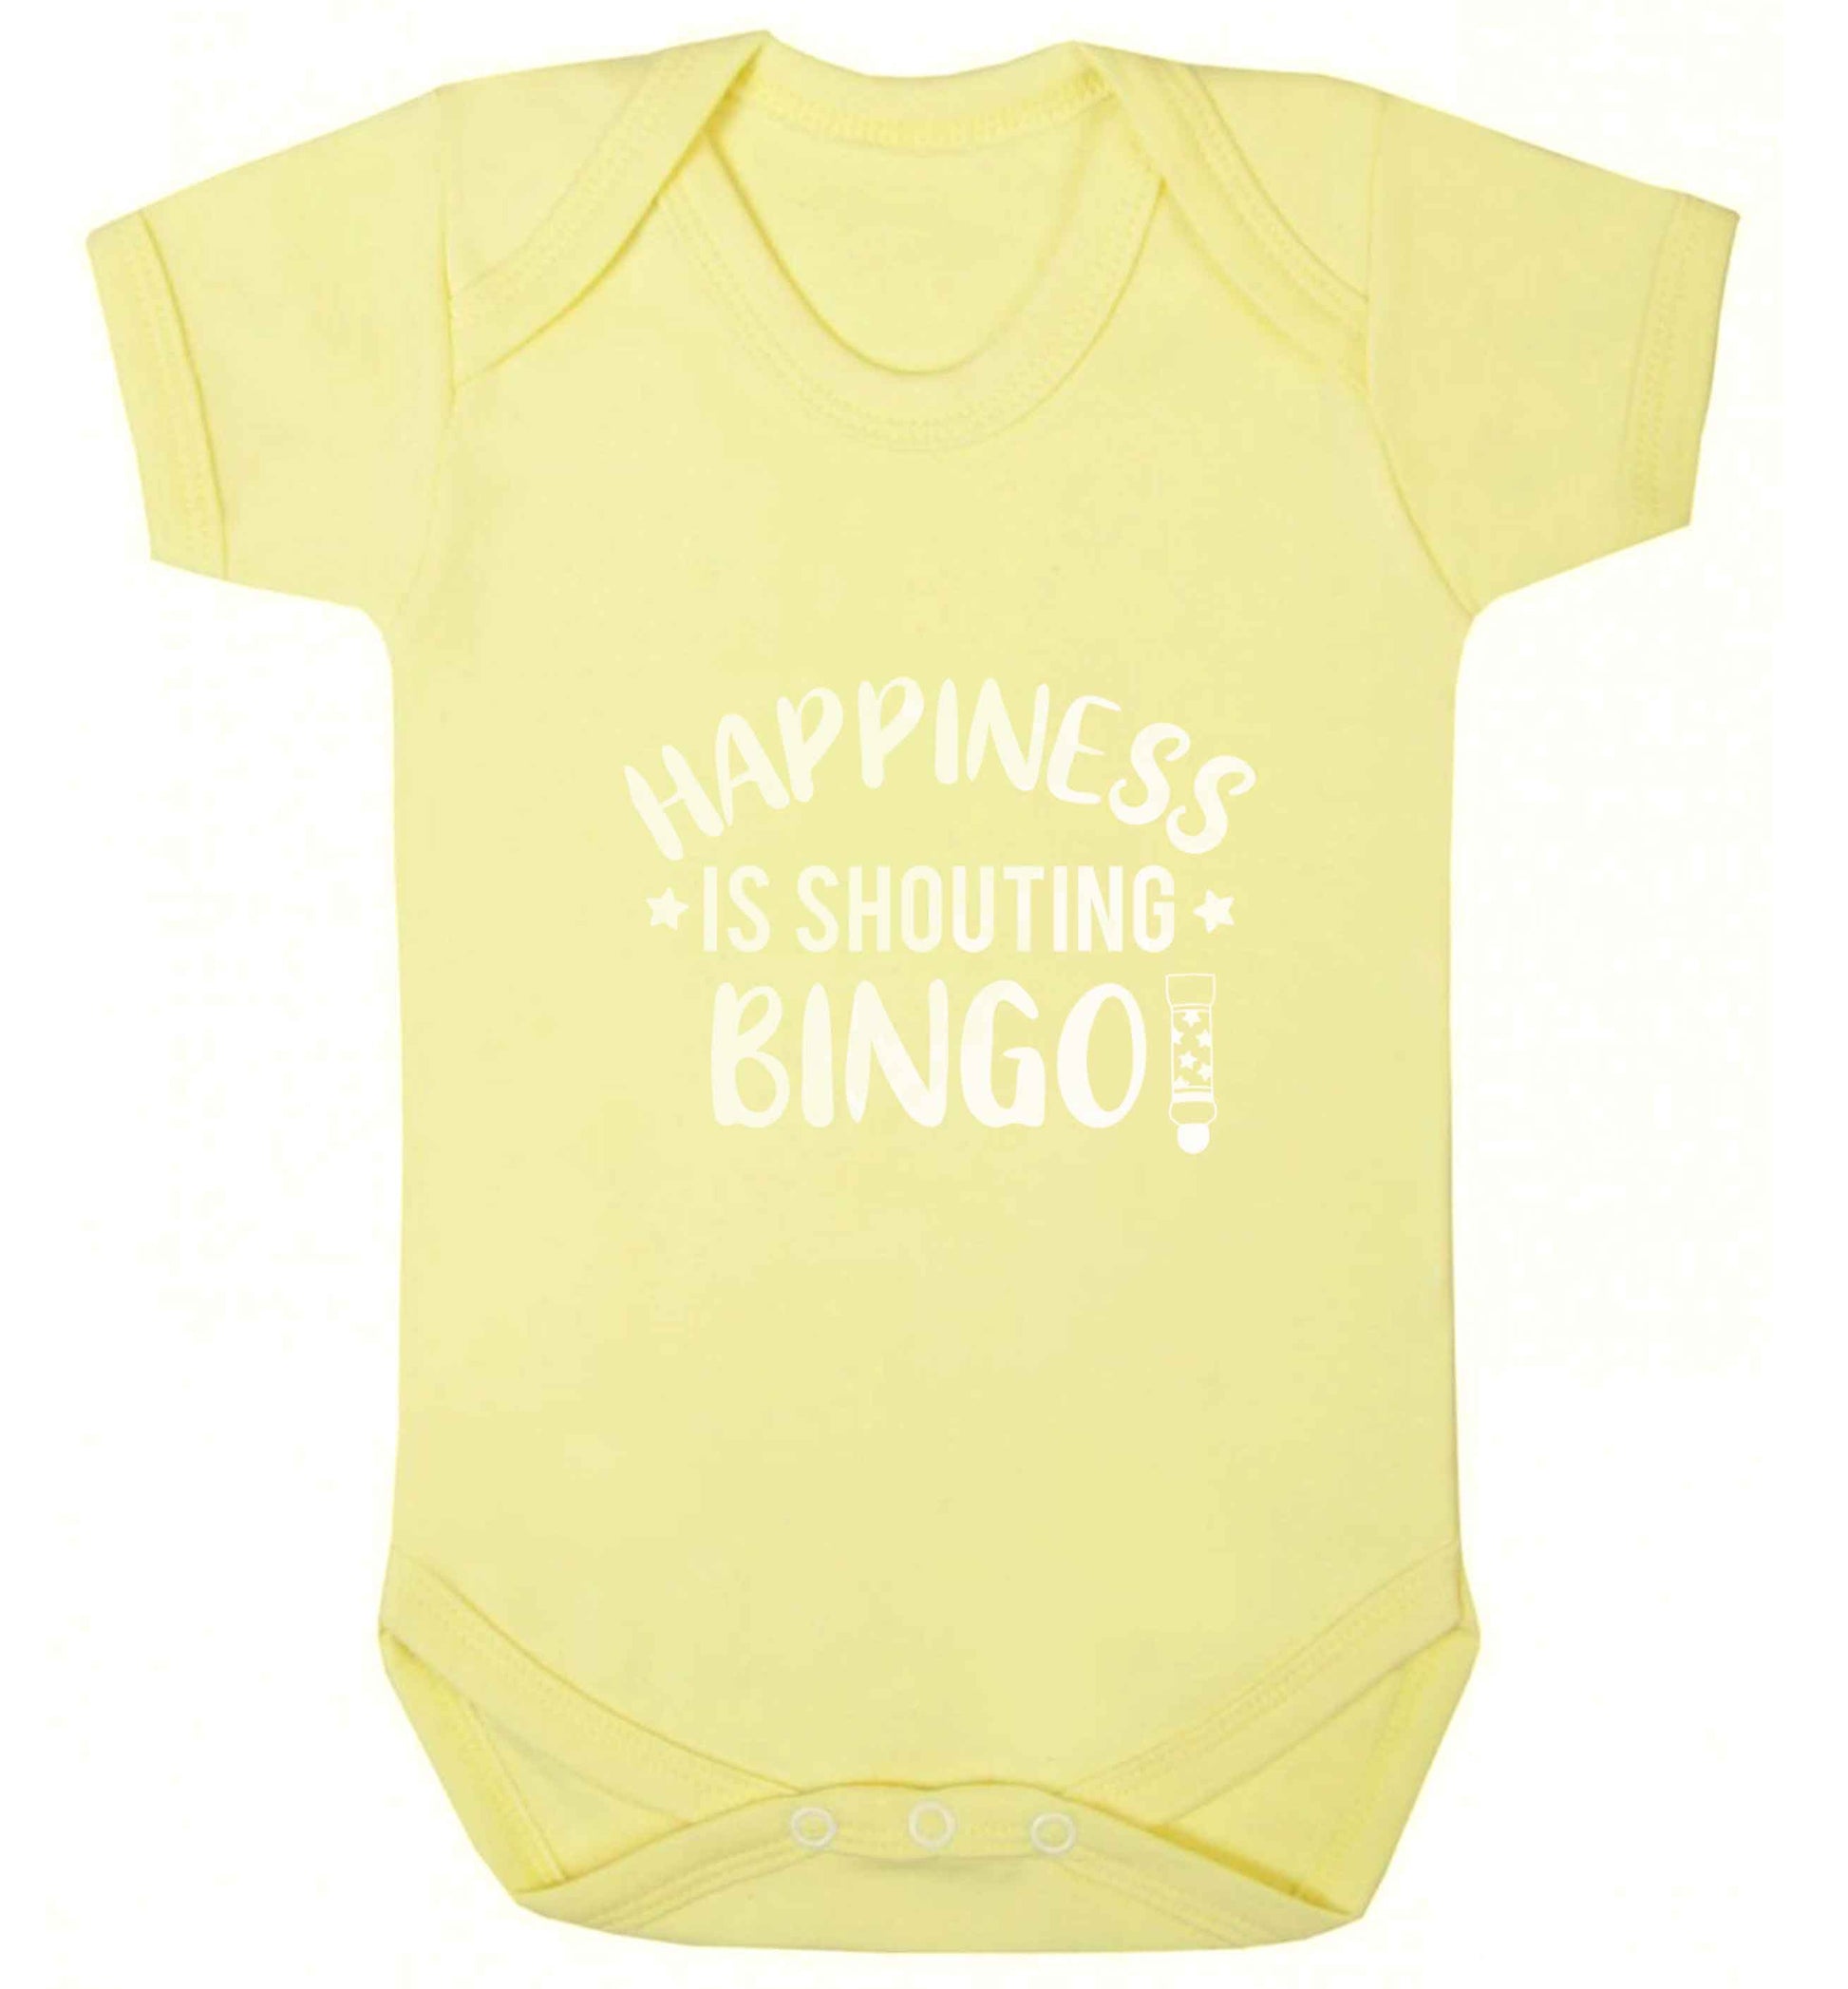 Happiness is shouting bingo! baby vest pale yellow 18-24 months